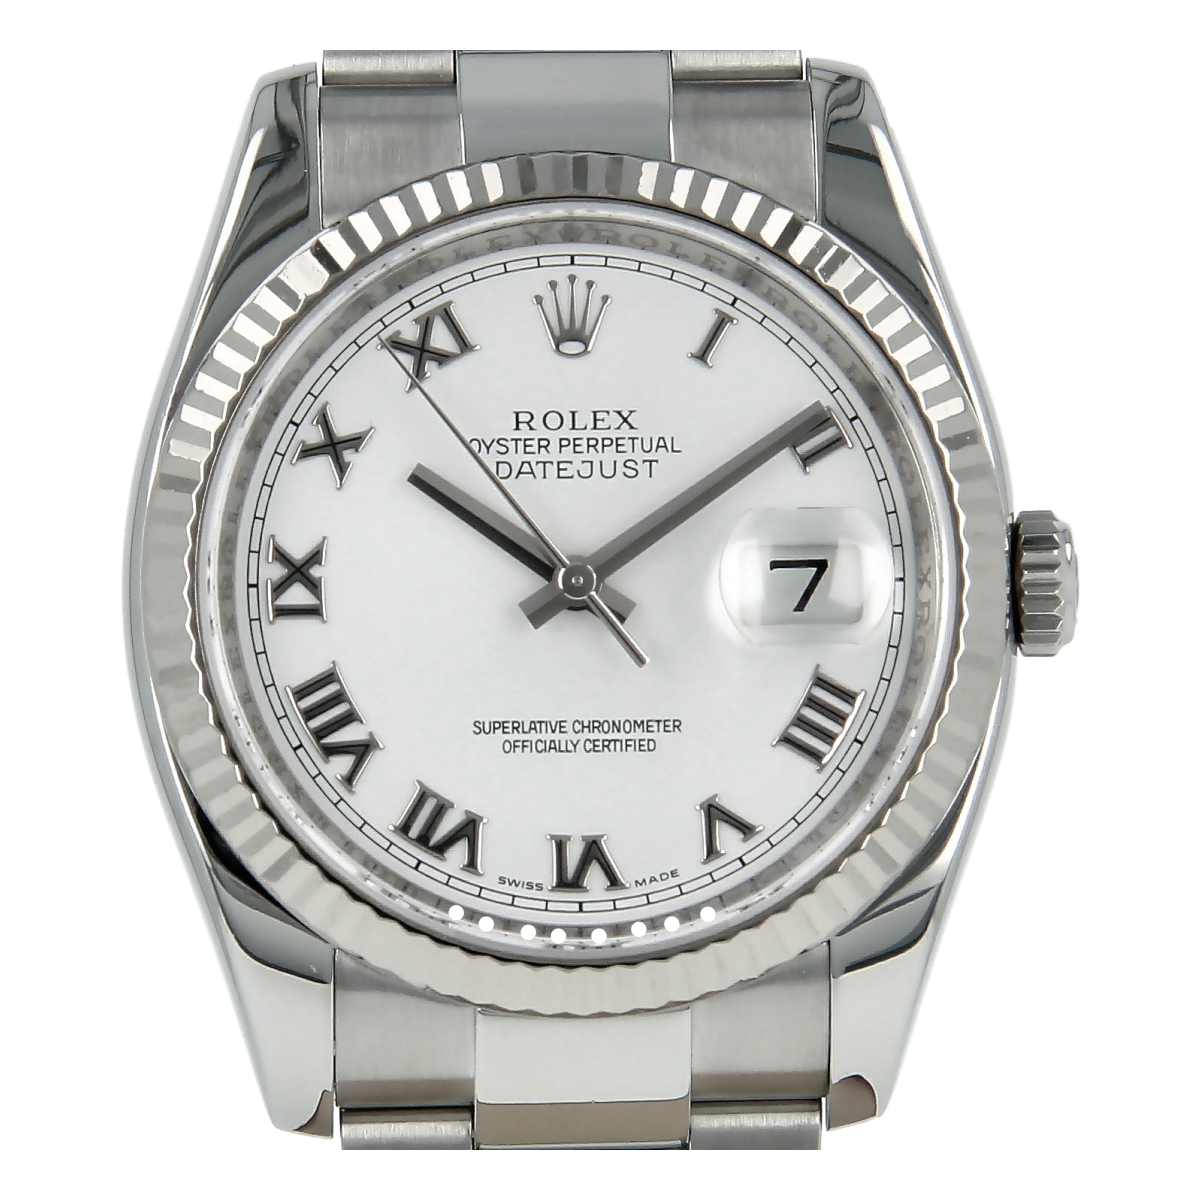 Rolex Datejust 116234 36mm White Dial 